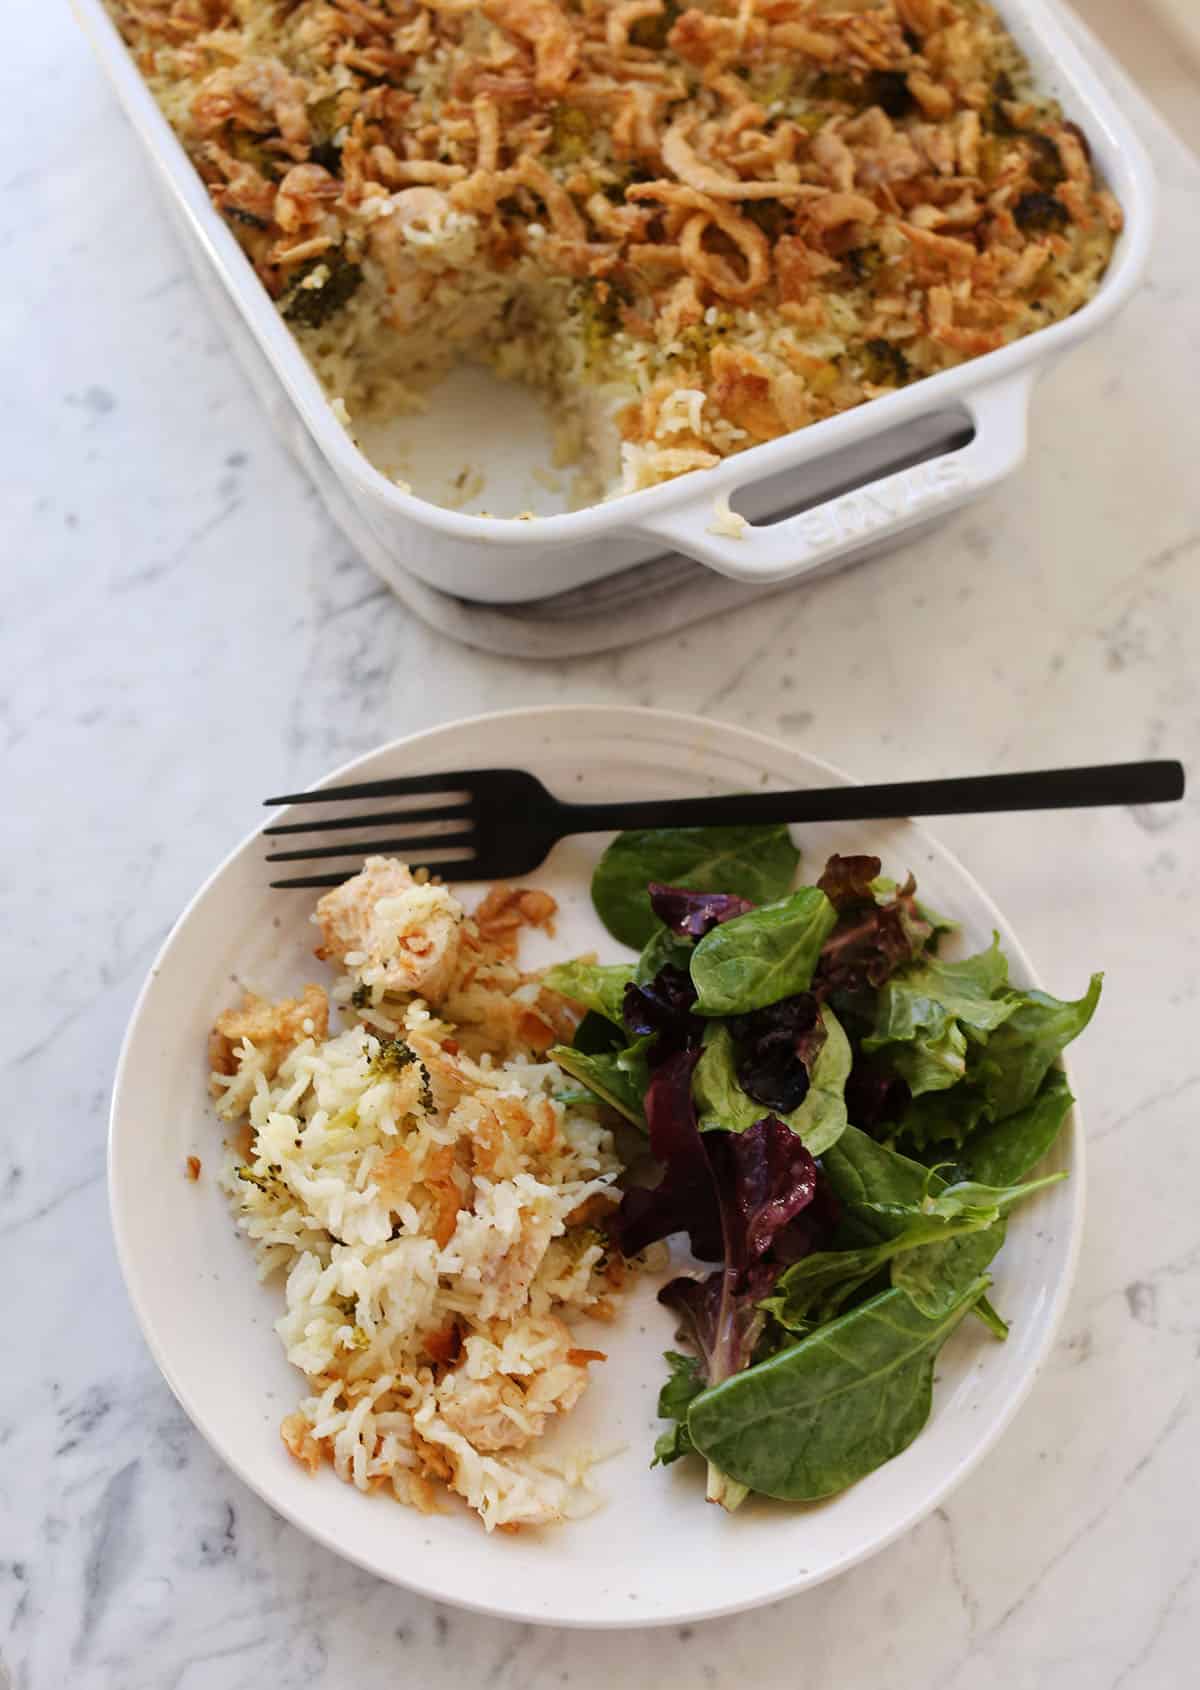 Plate of Chicken Rice Casserole and Salad